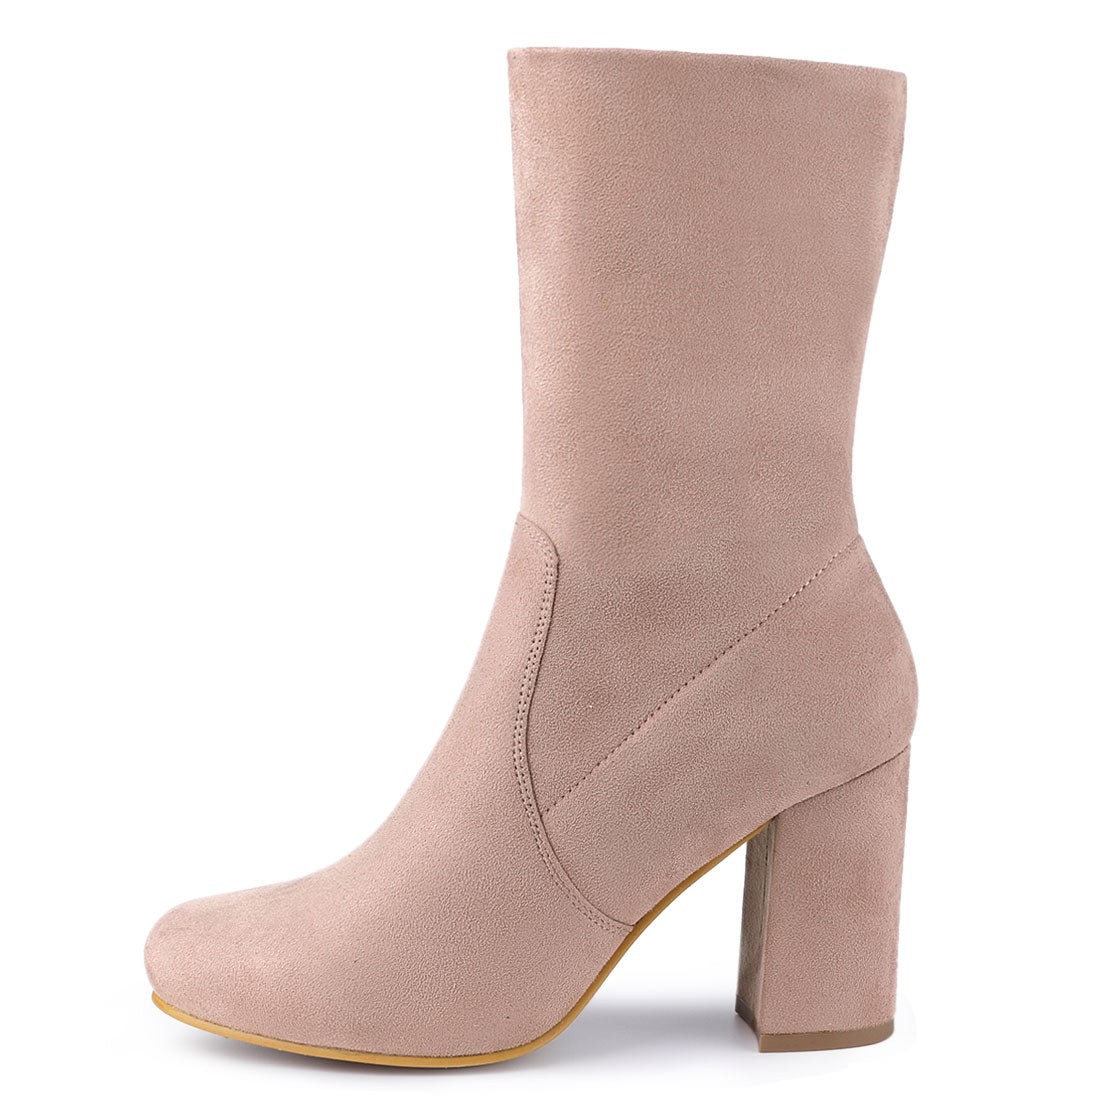 Allegra K Rounded Toe Block Heel Foldable Ankle Boots